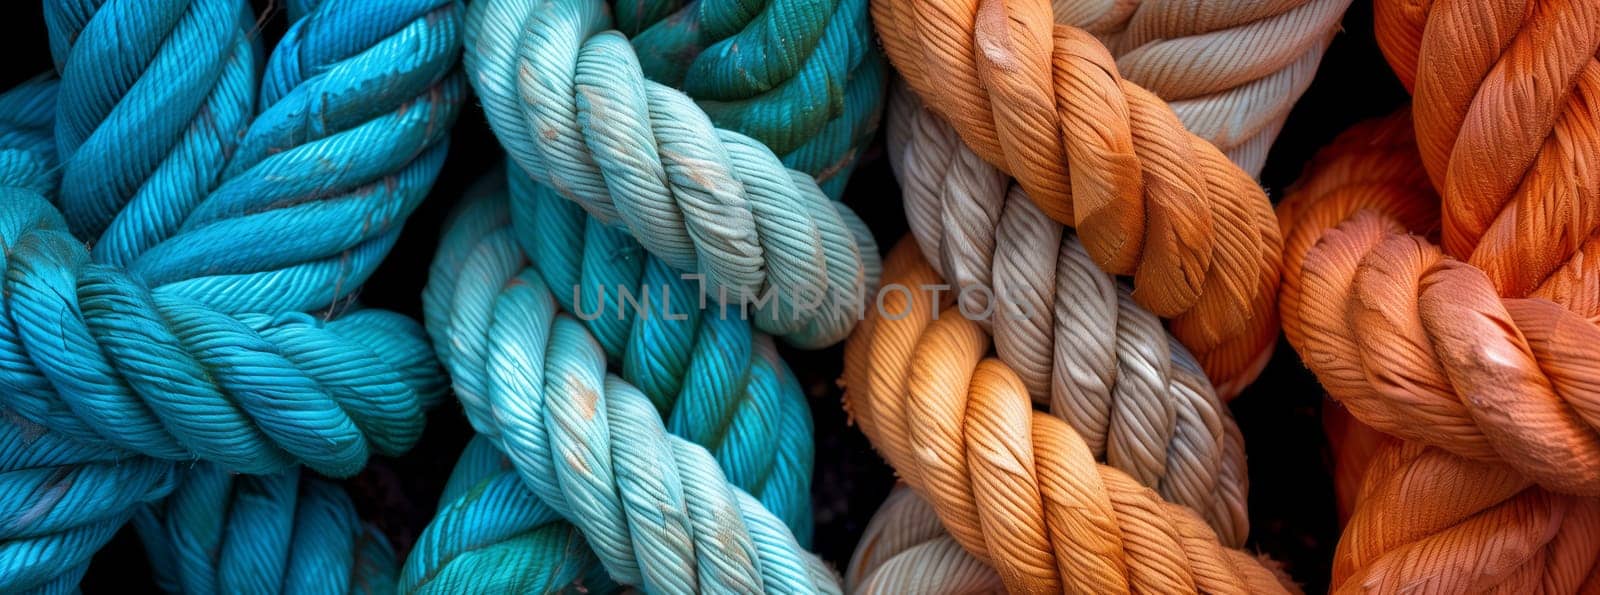 A close up of three different colored ropes stacked on top of each other, featuring electric blue, patterned wool, and woolen fiber threads